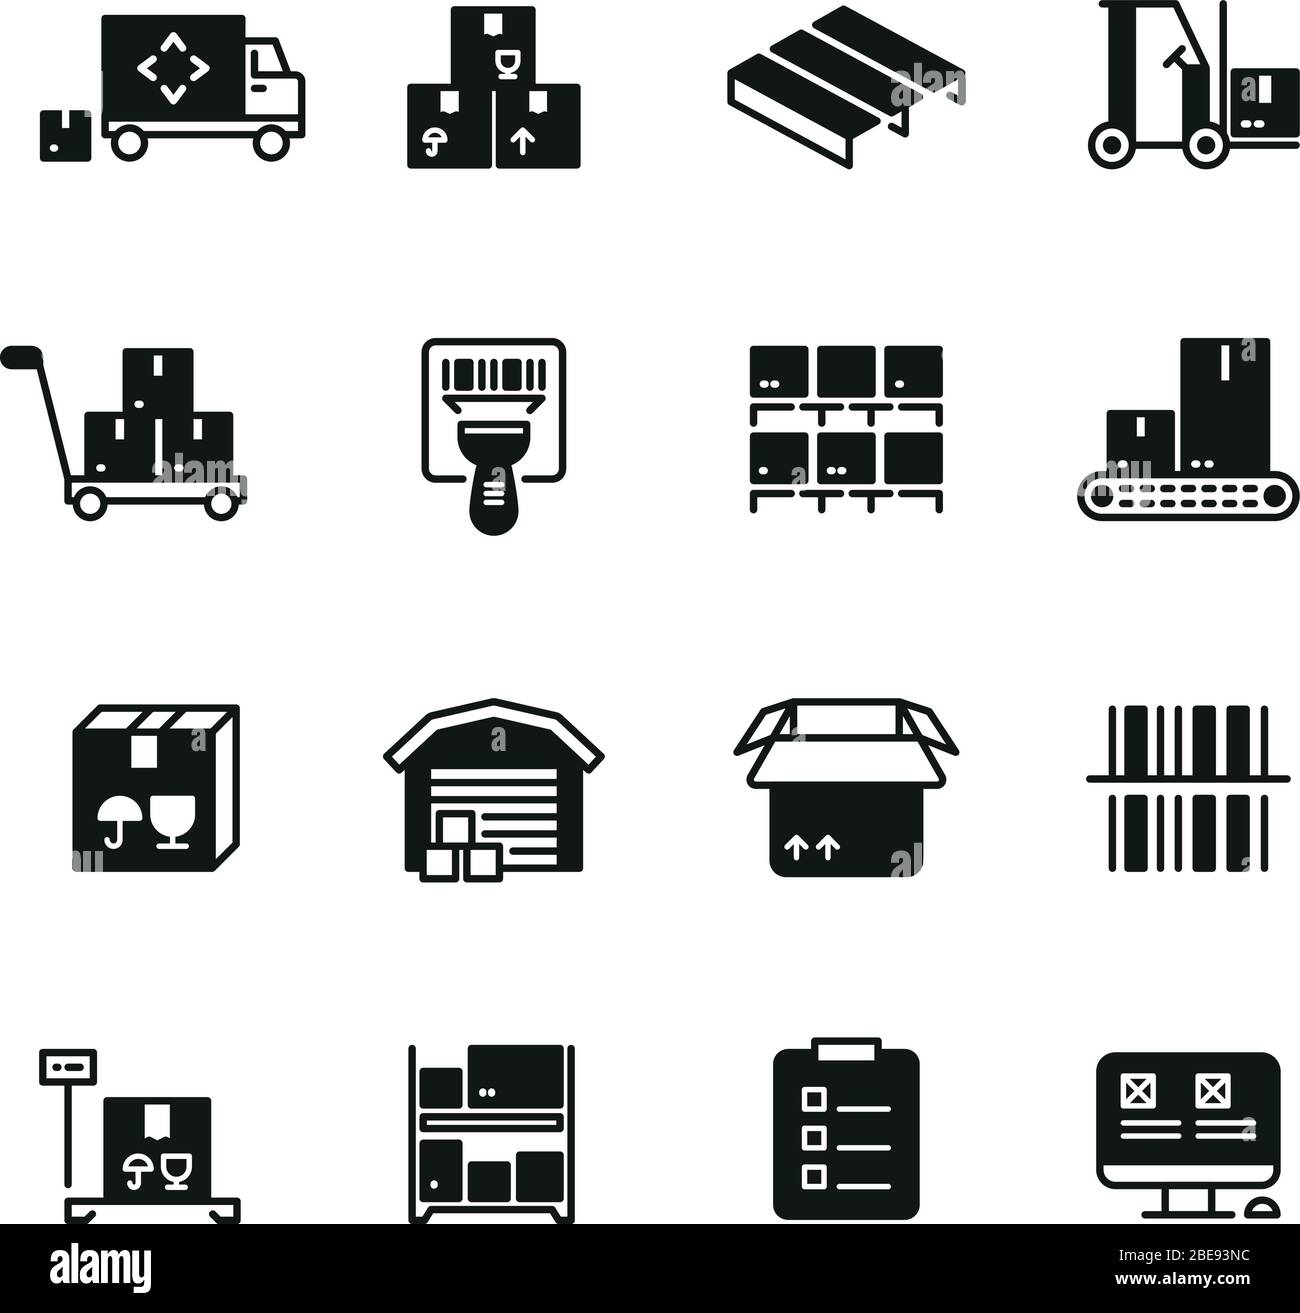 Industrial warehouse, logistics and distribution management vector icons. Illustration of delivery and storage service icons Stock Vector